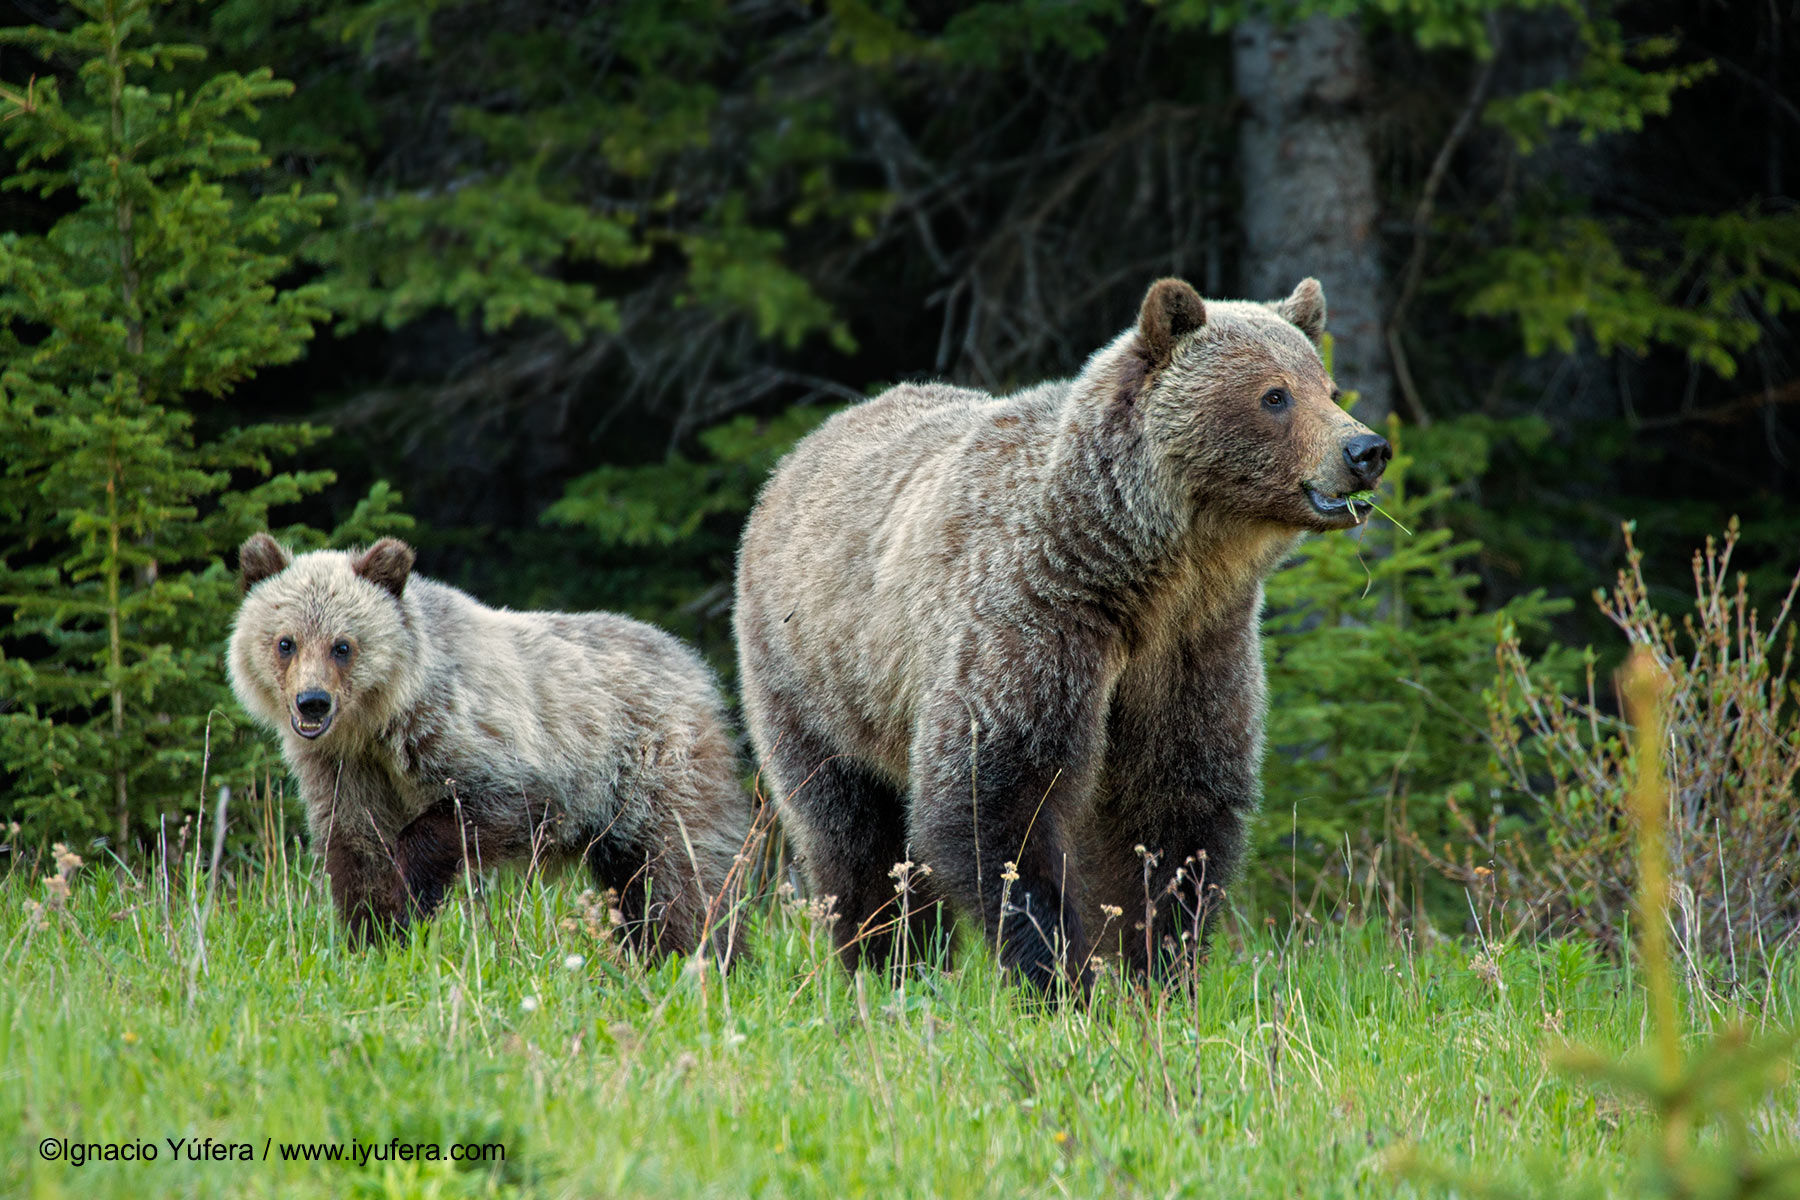 grizzly sow and cub